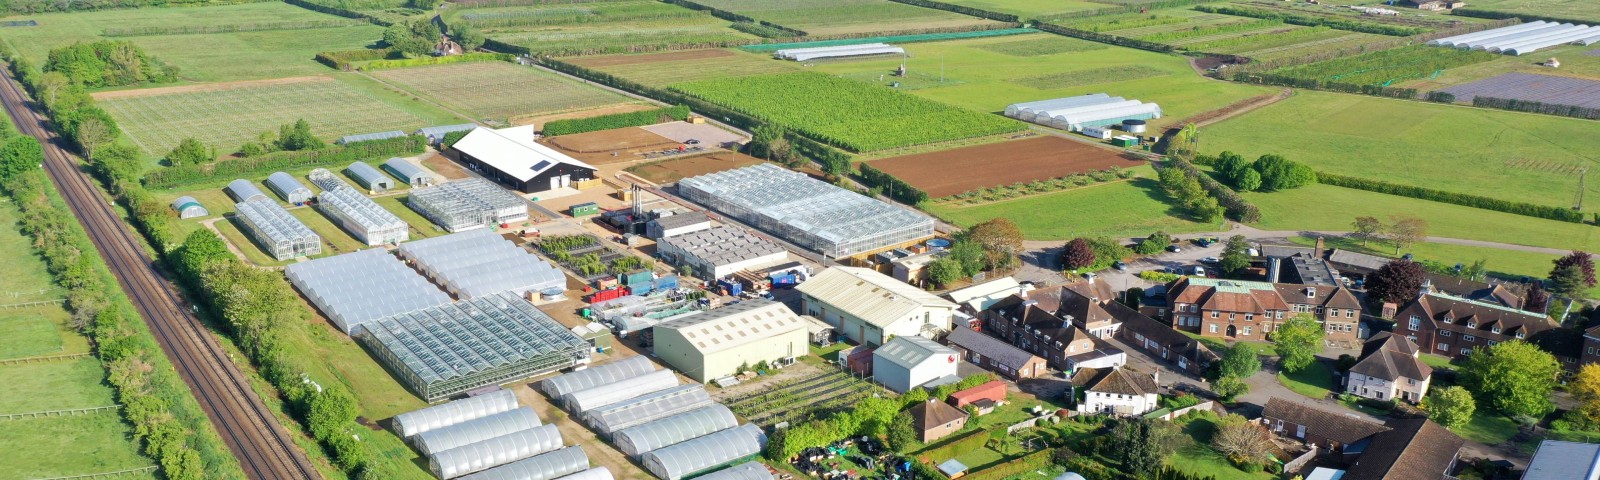 Aerial shot of NIAB's site at East Malling